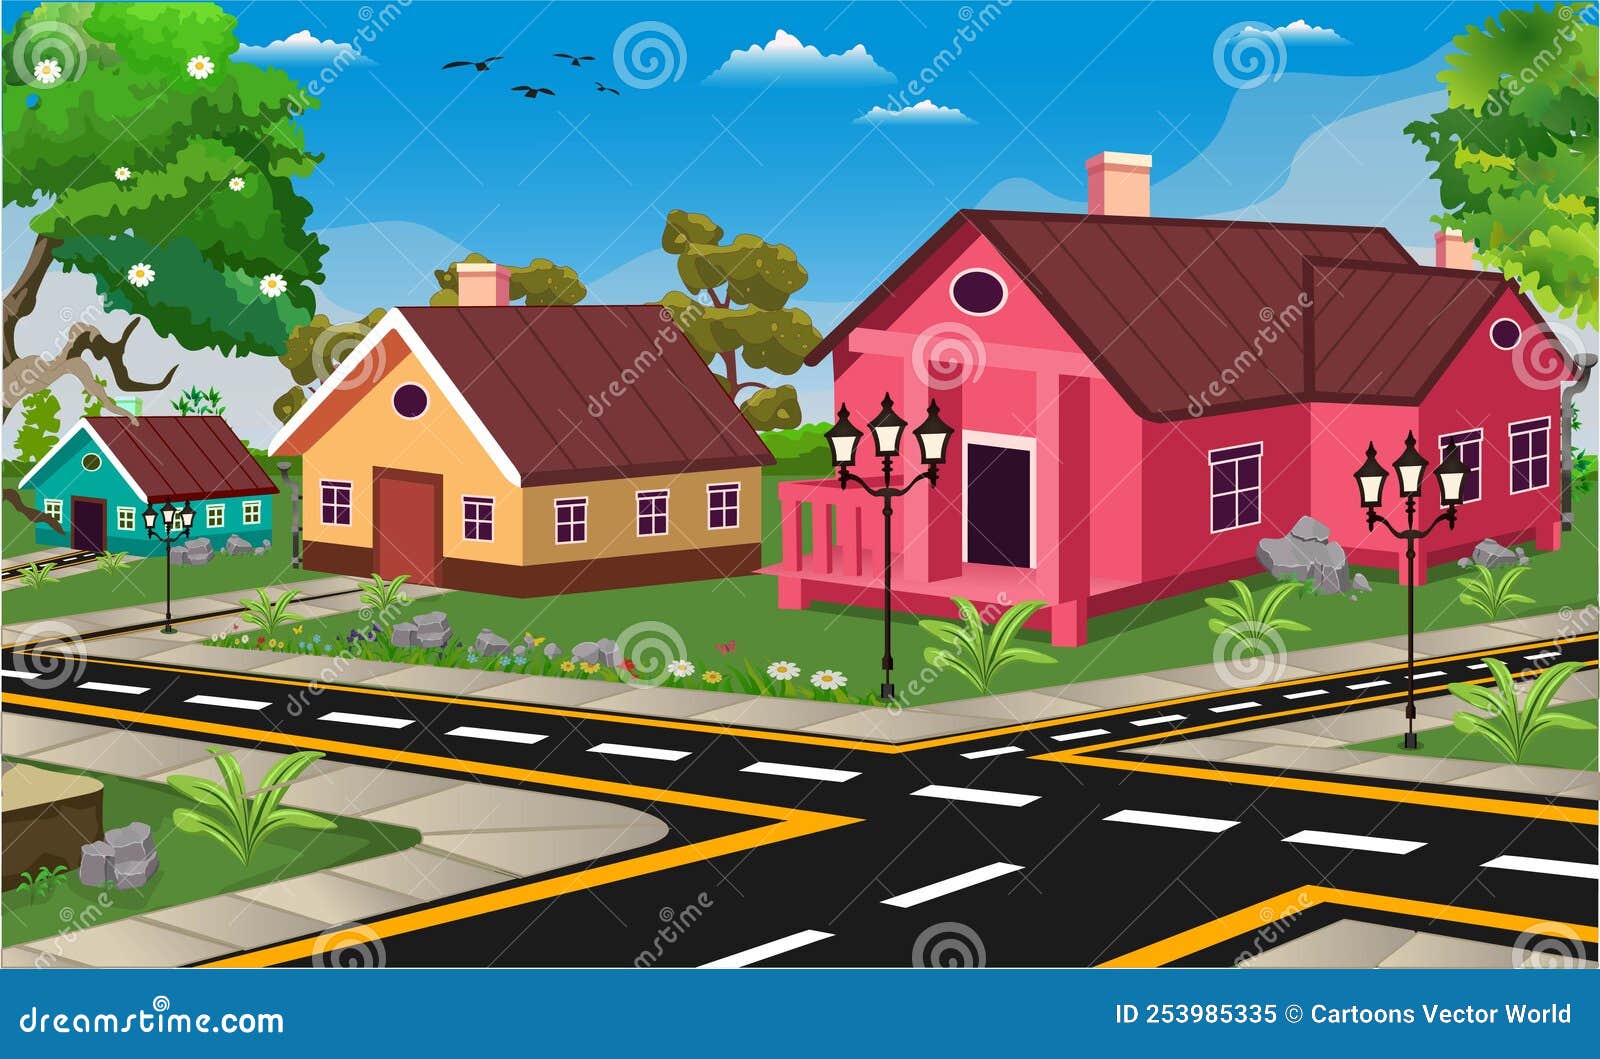 Town Cartoon Background Illustration with Road, Houses, Trees. Street Light  and Narrow Road. Stock Vector - Illustration of agriculture, building:  253985335